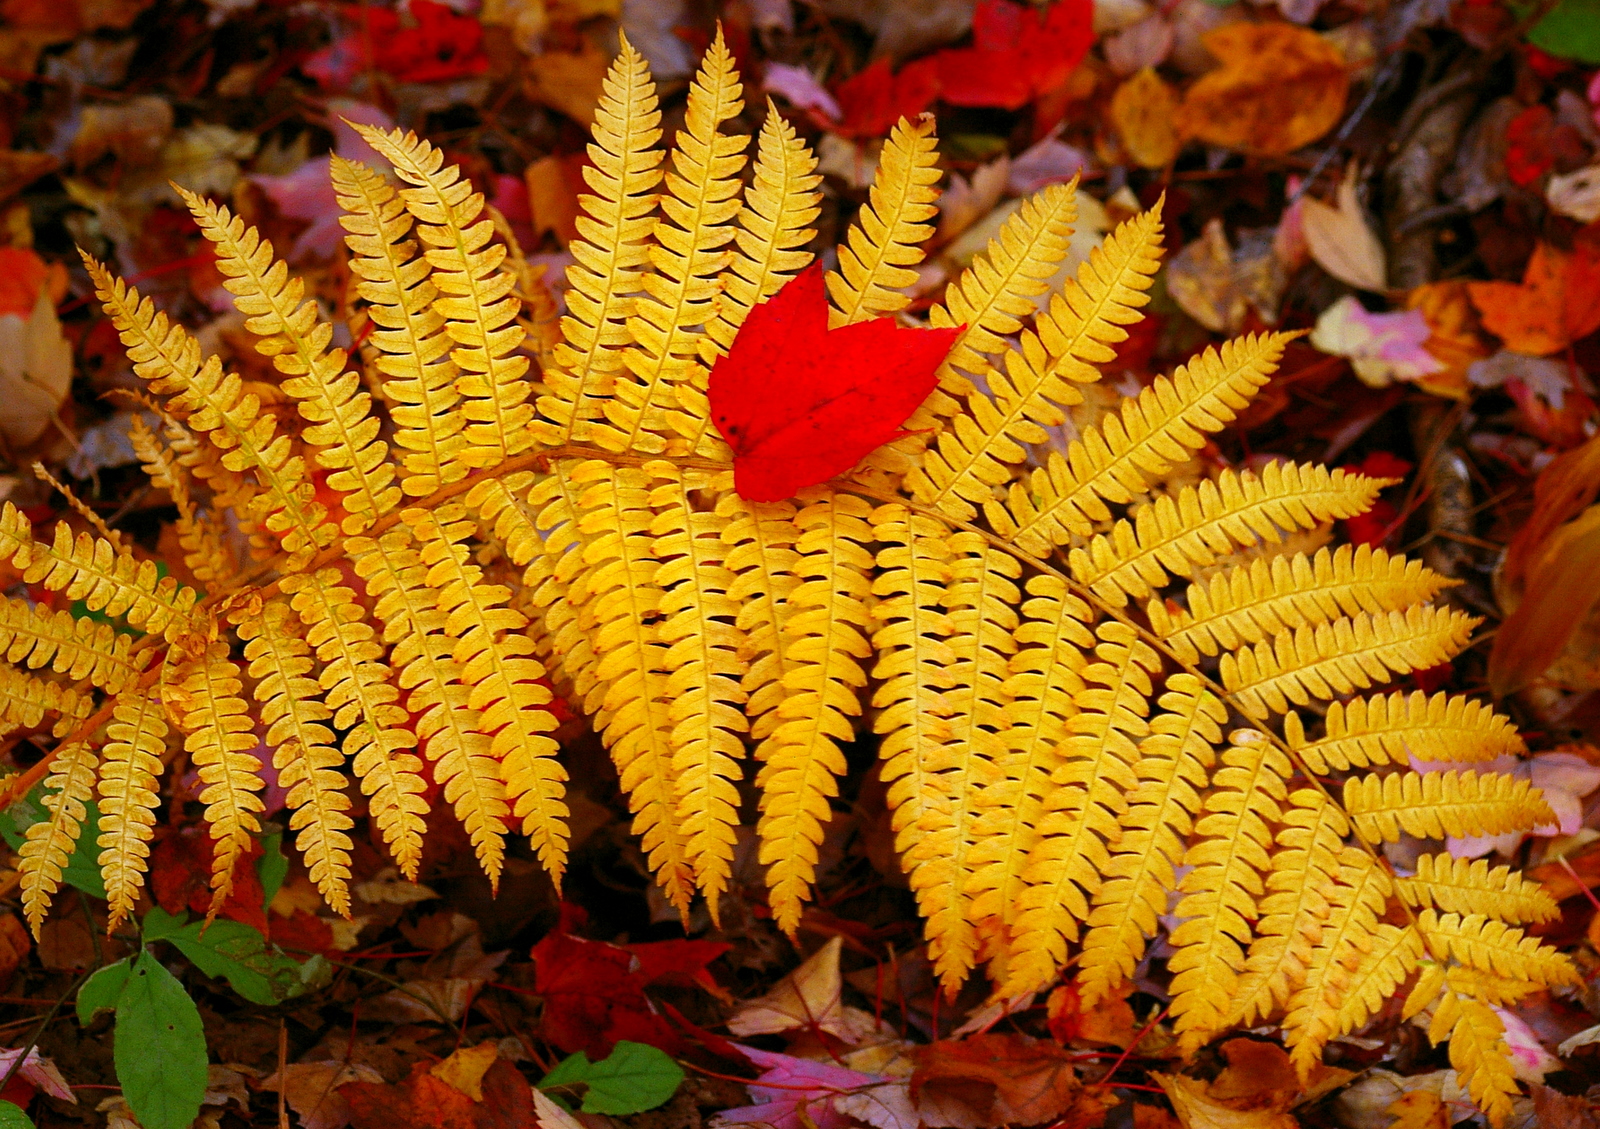 Red Leaf on Golden Fern (user submitted)